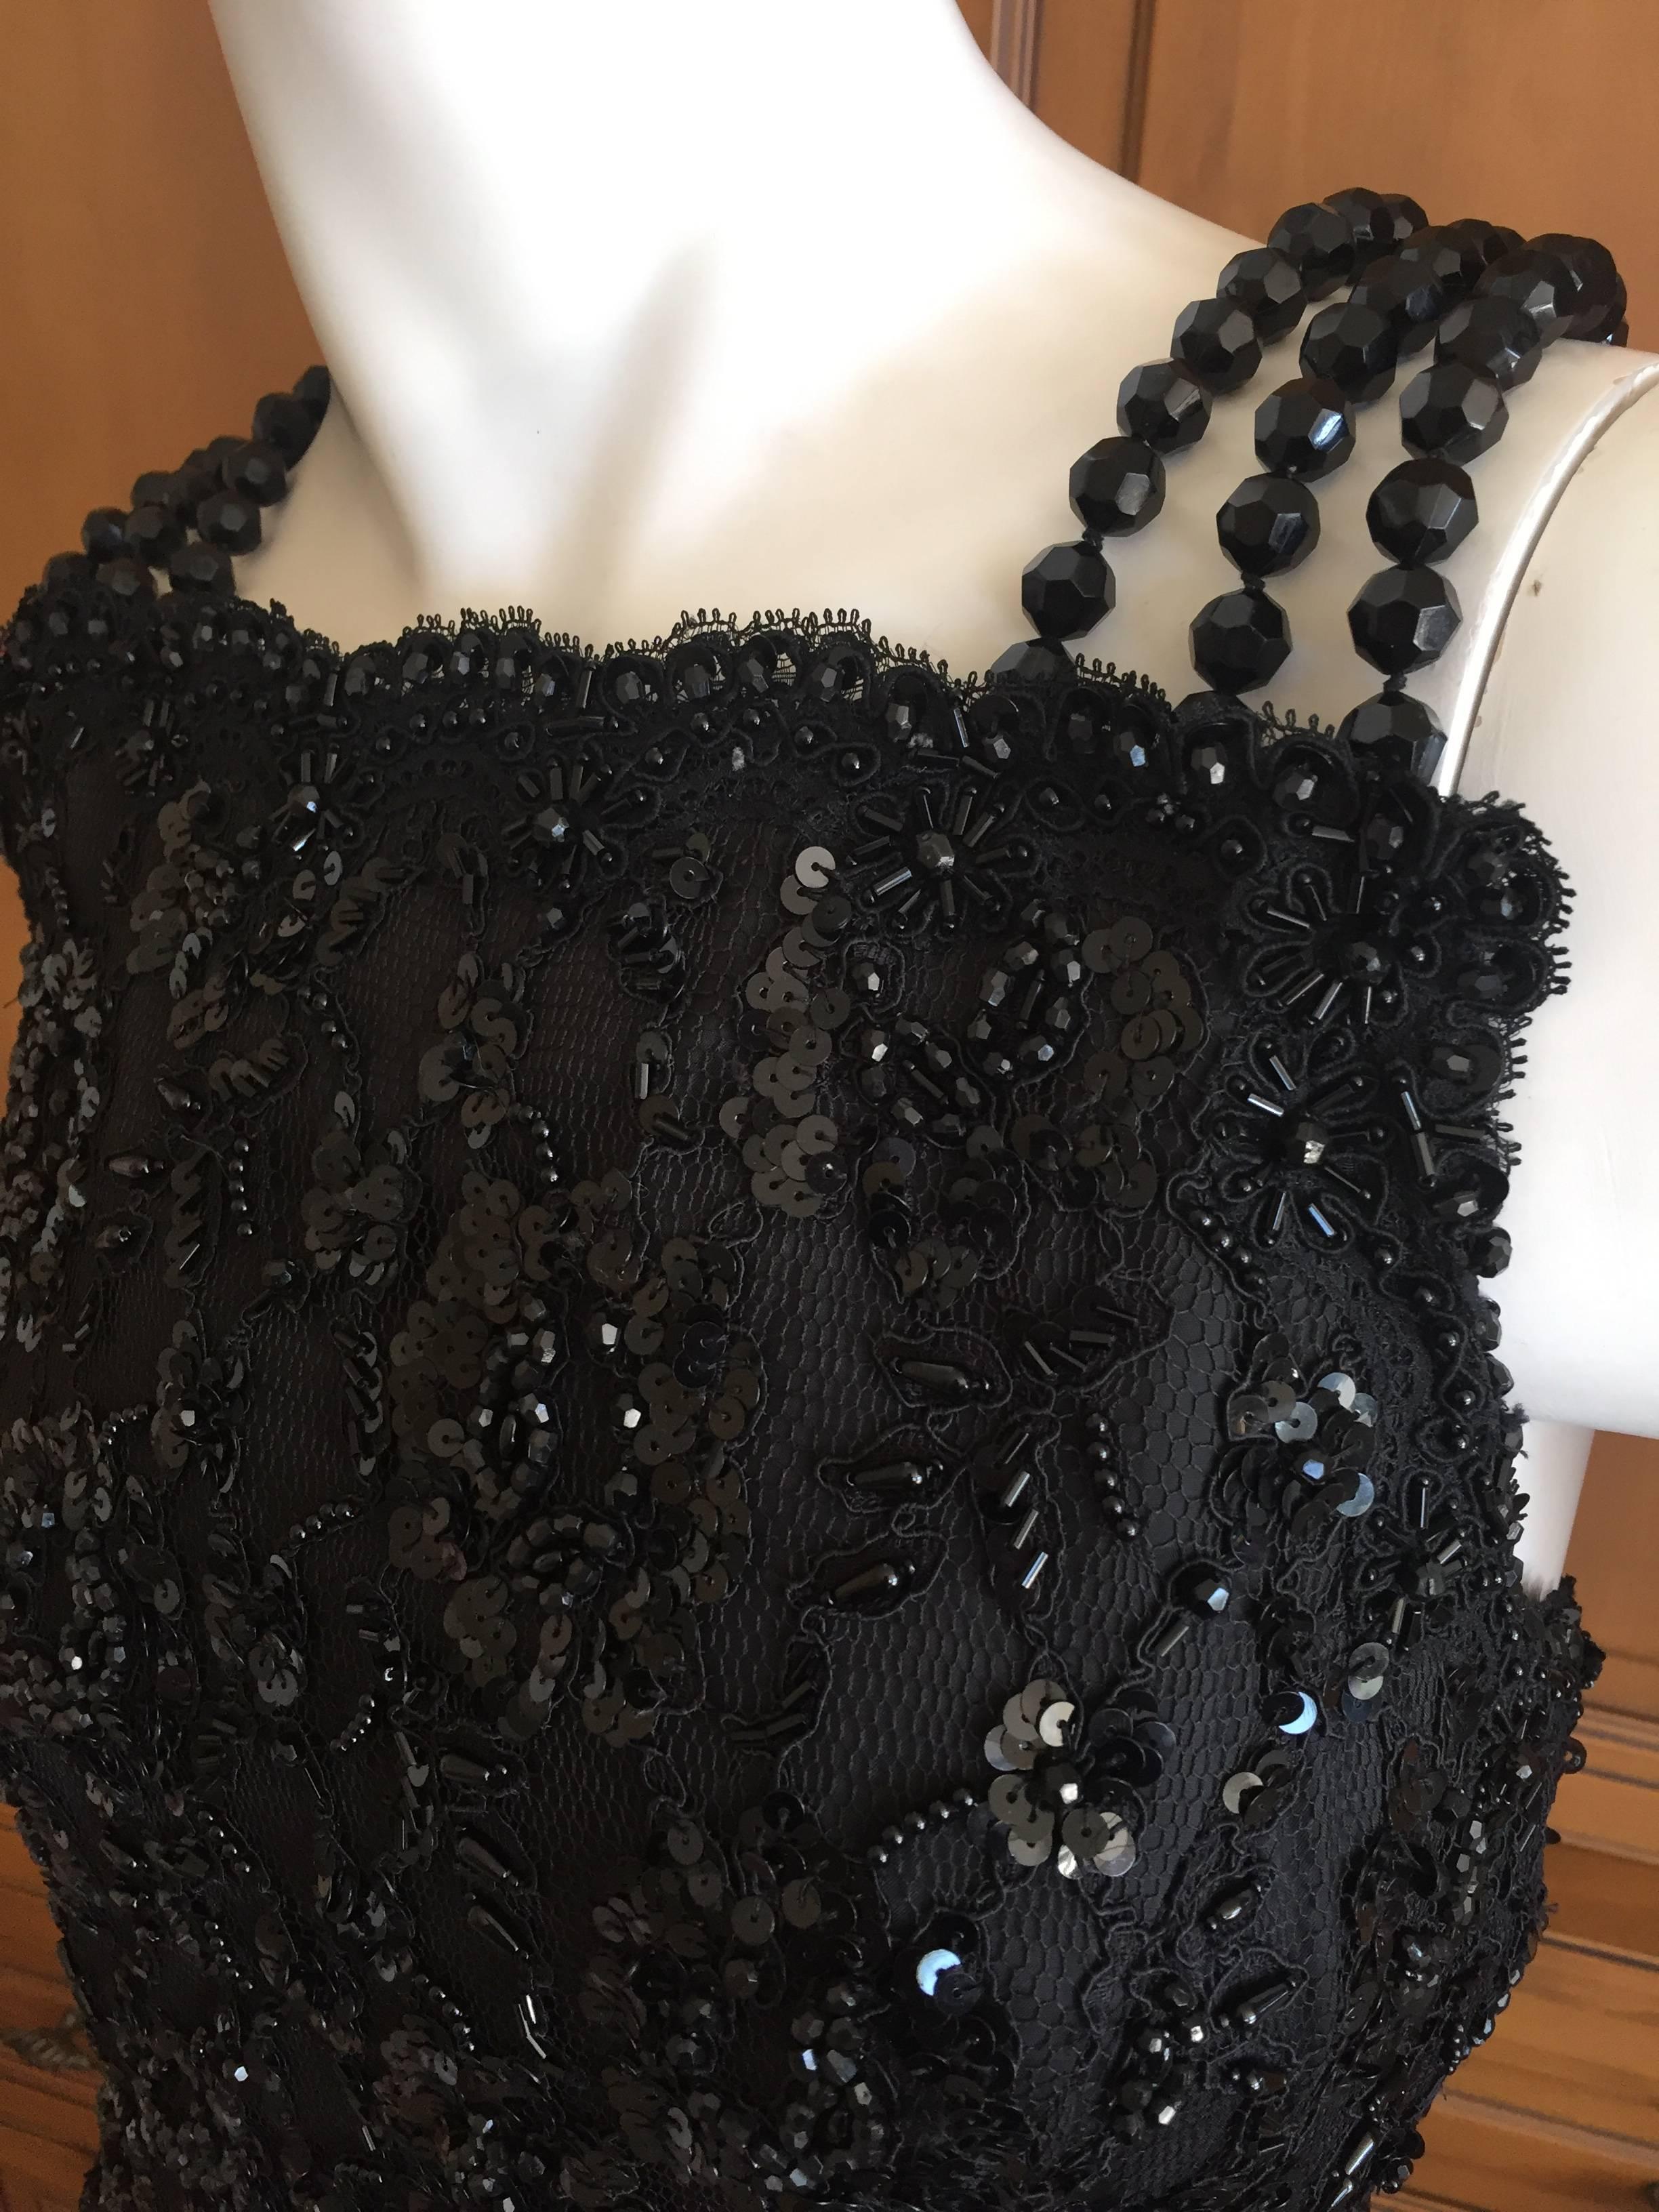 Black Oscar de la Renta 1980's Sequin Cocktail Dress with Beads and Bow